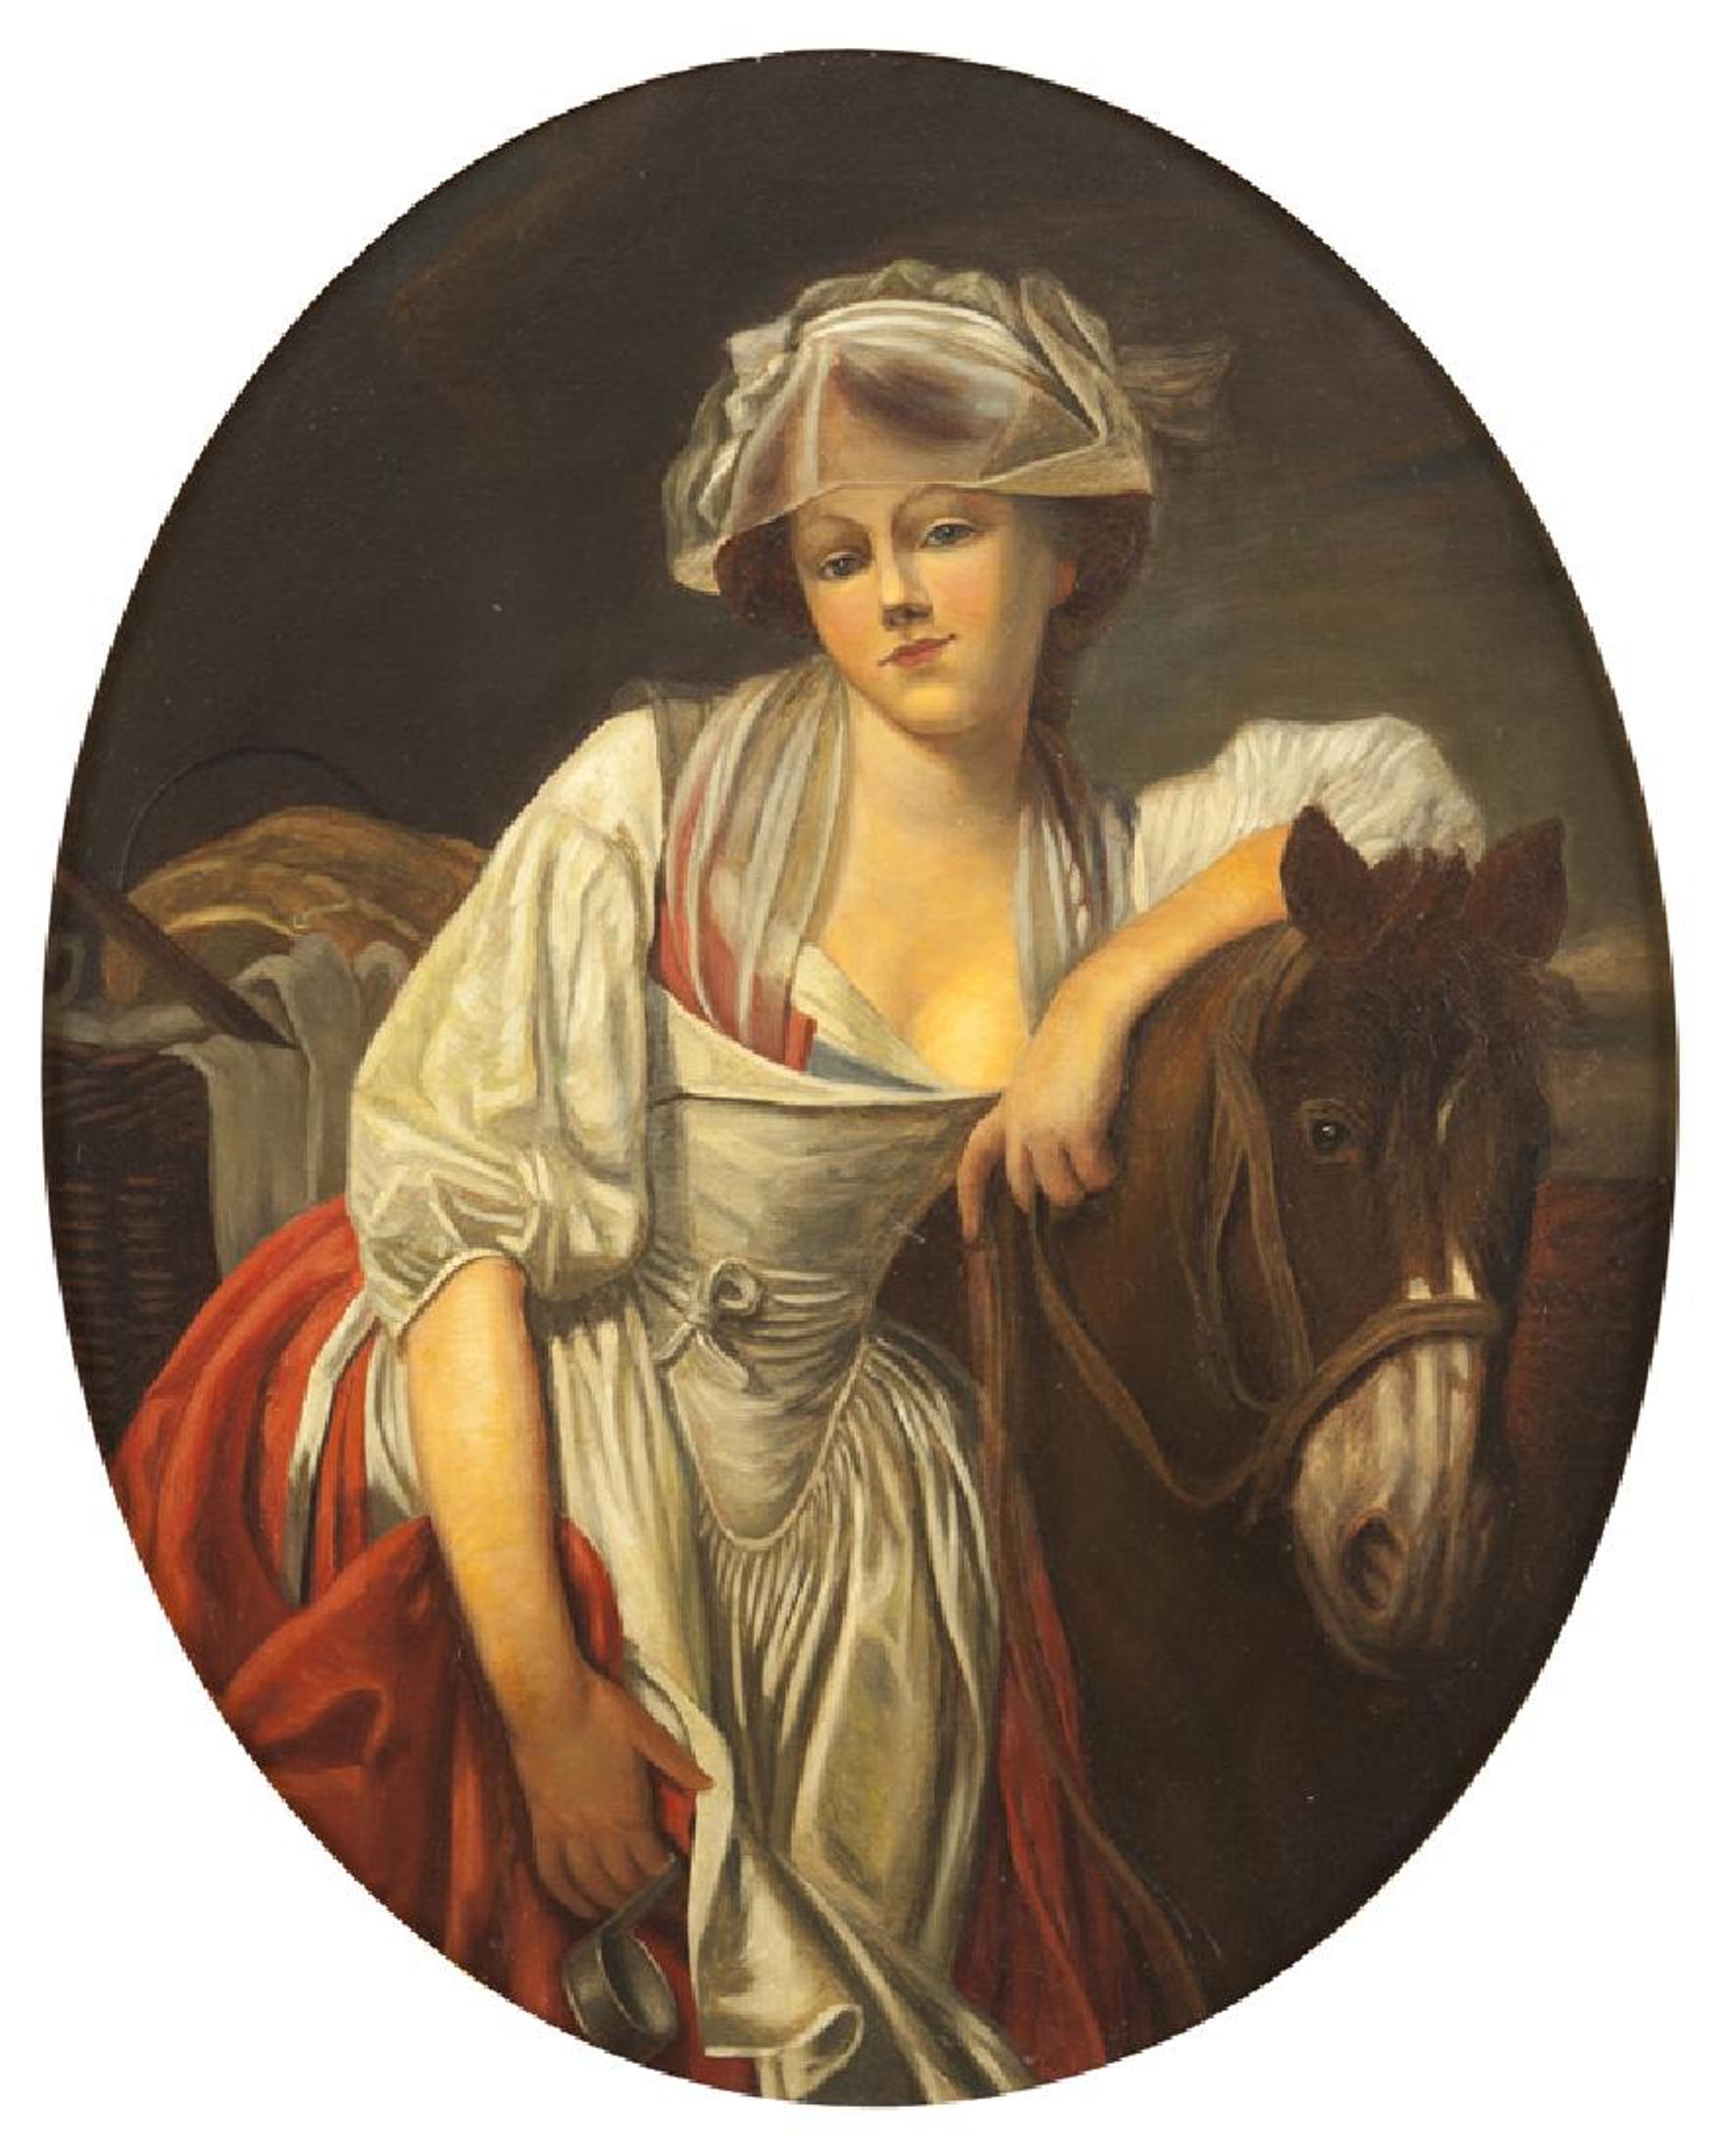 Impressive Continental oval oil on canvas painting of a woman with horse, 19th century.
The beautiful and intricate giltwood frame is surmounted by a floral basket flanked by fruiting and ribbon inspired branches, over an oval gilt frame trimmed